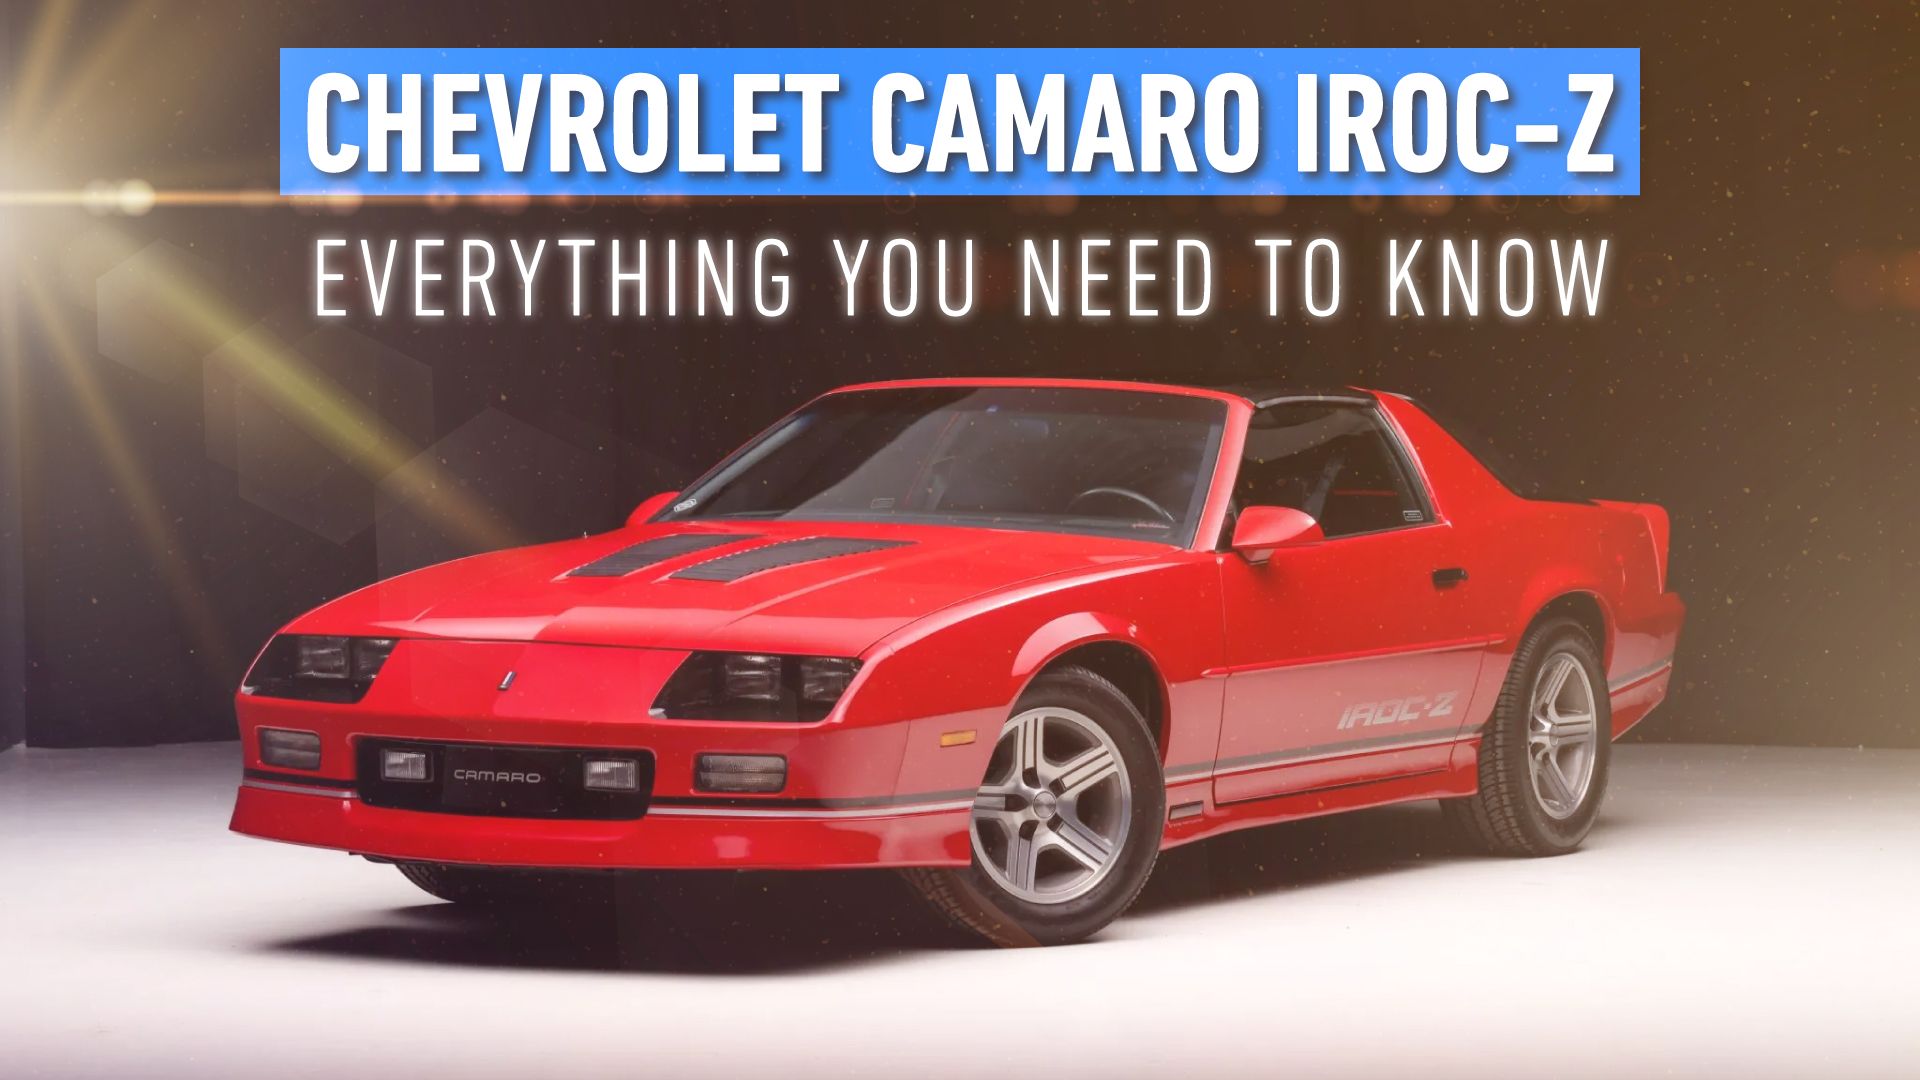 Everything-You-Need-To-Know-About-The-Chevrolet-Camaro-IROC-Z